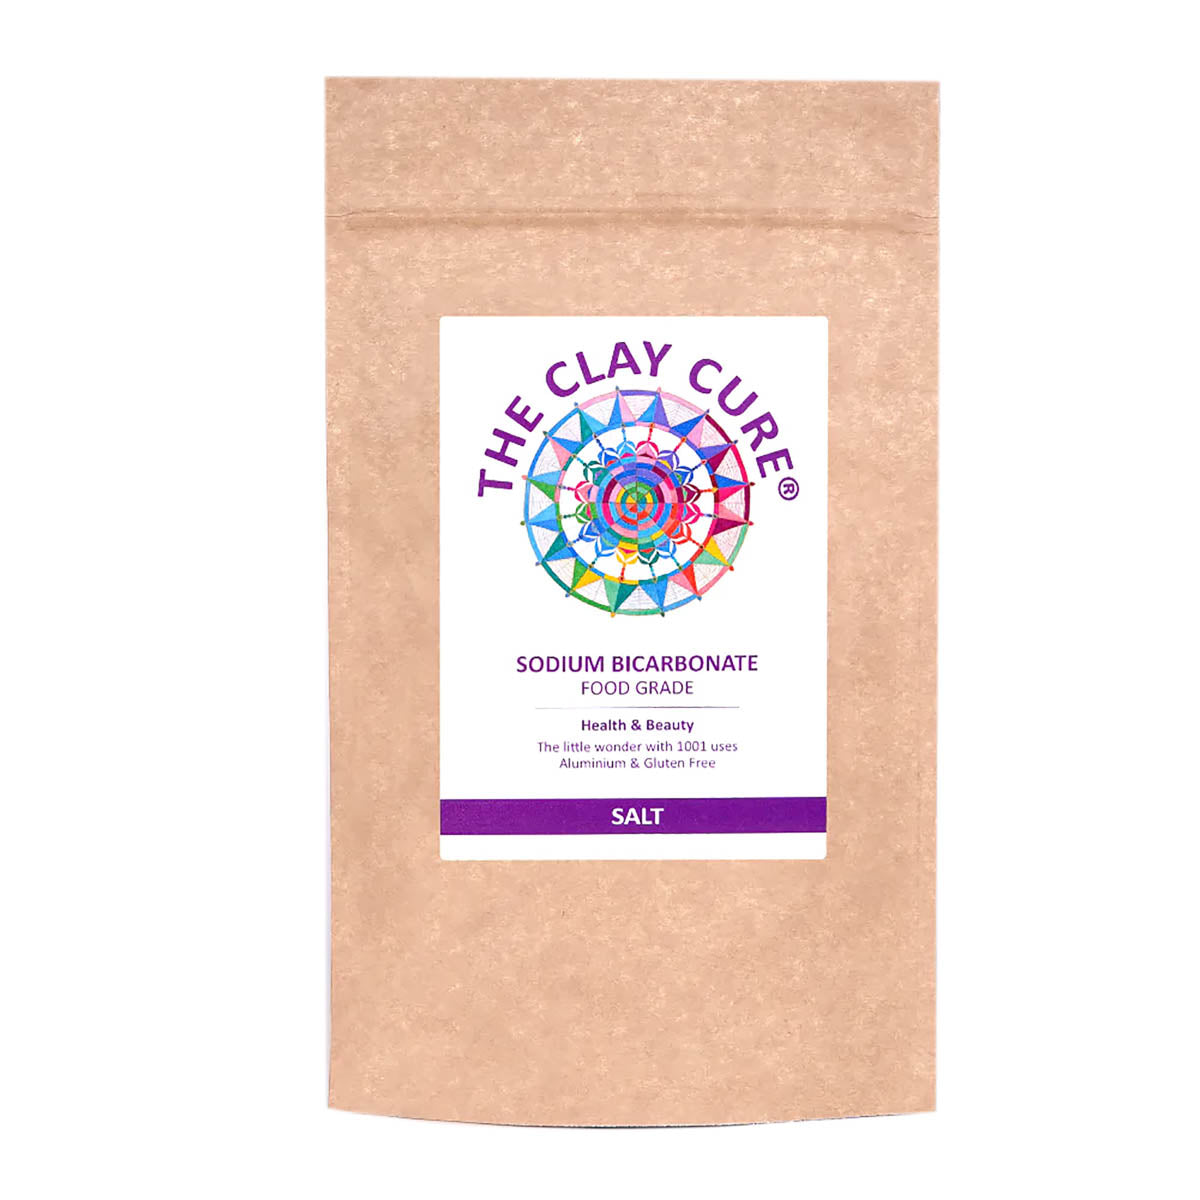 Food-Grade Sodium Bicarbonate (1kg) - The Clay Cure